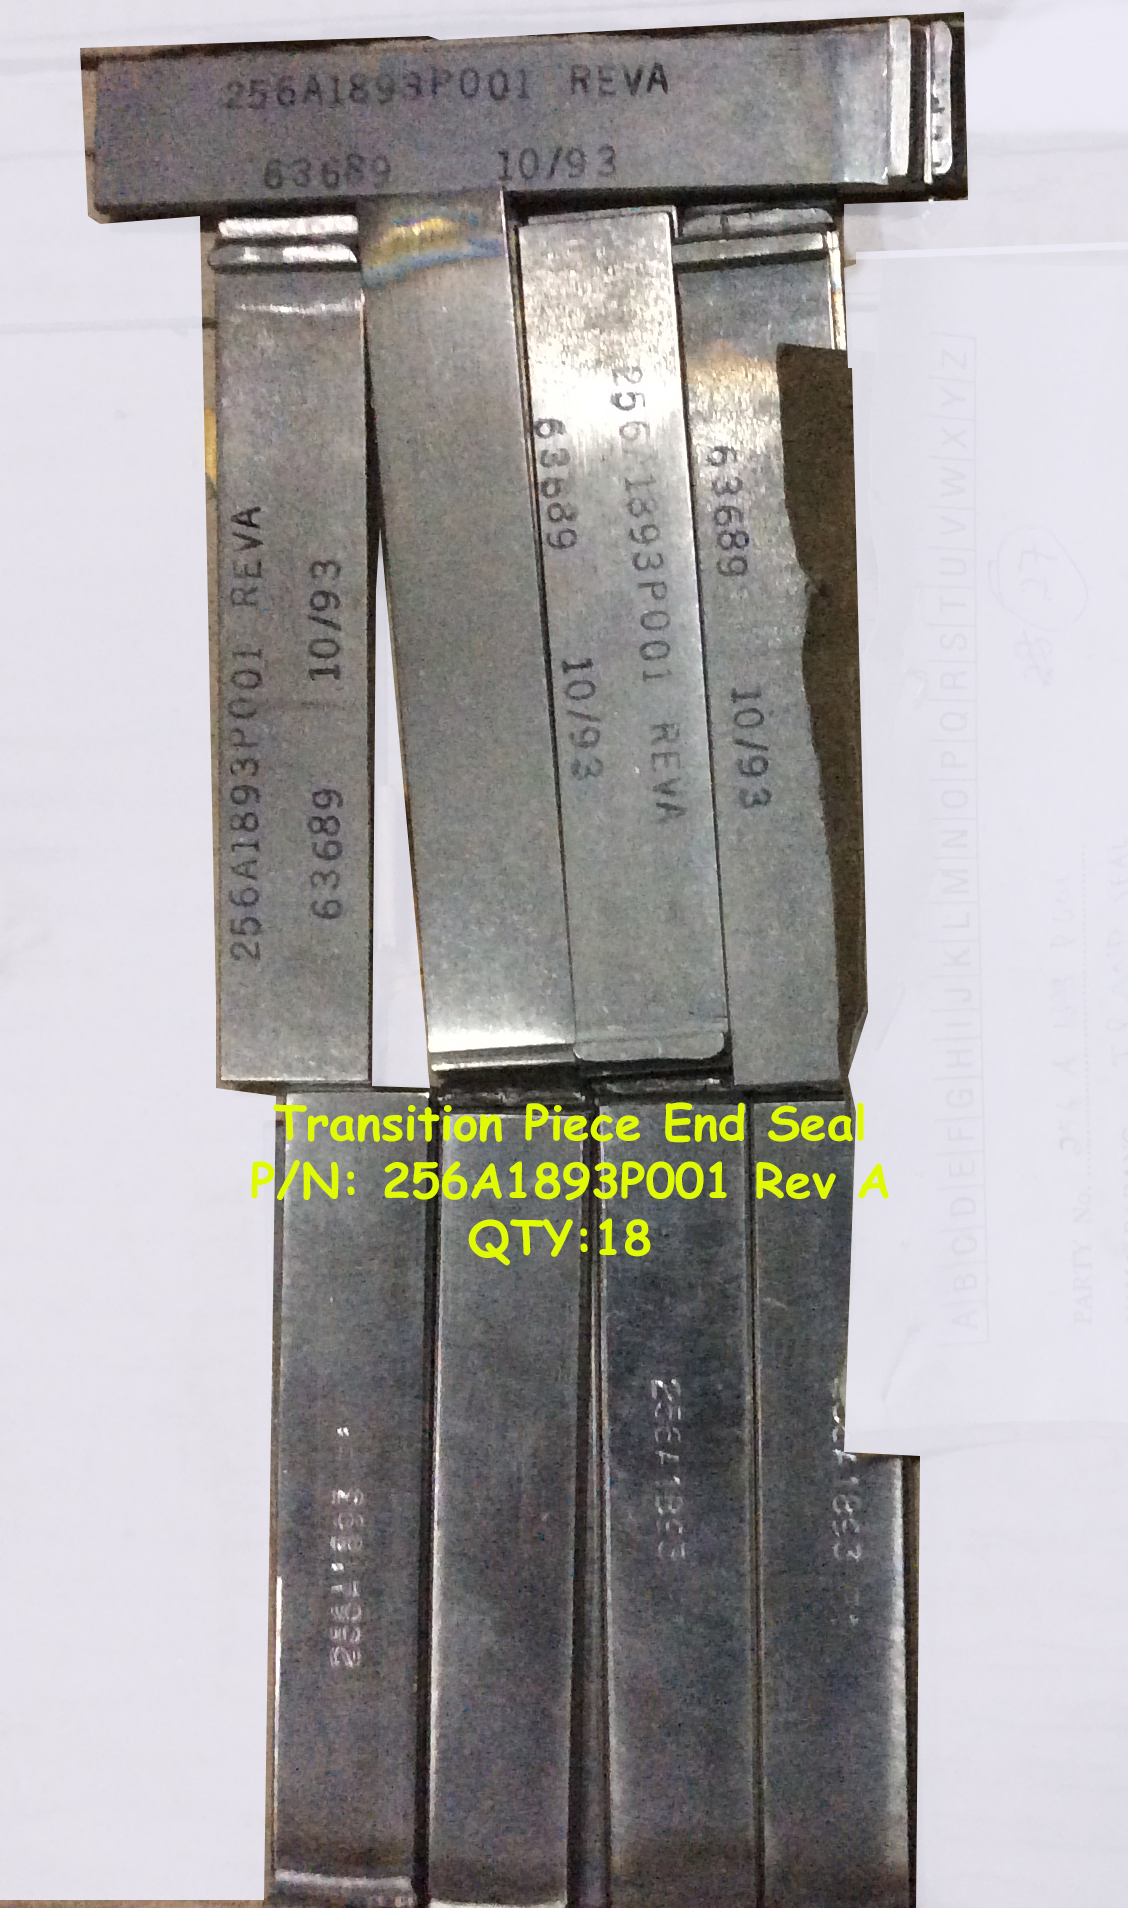 Transition Piece End Seal (256A1893P001)